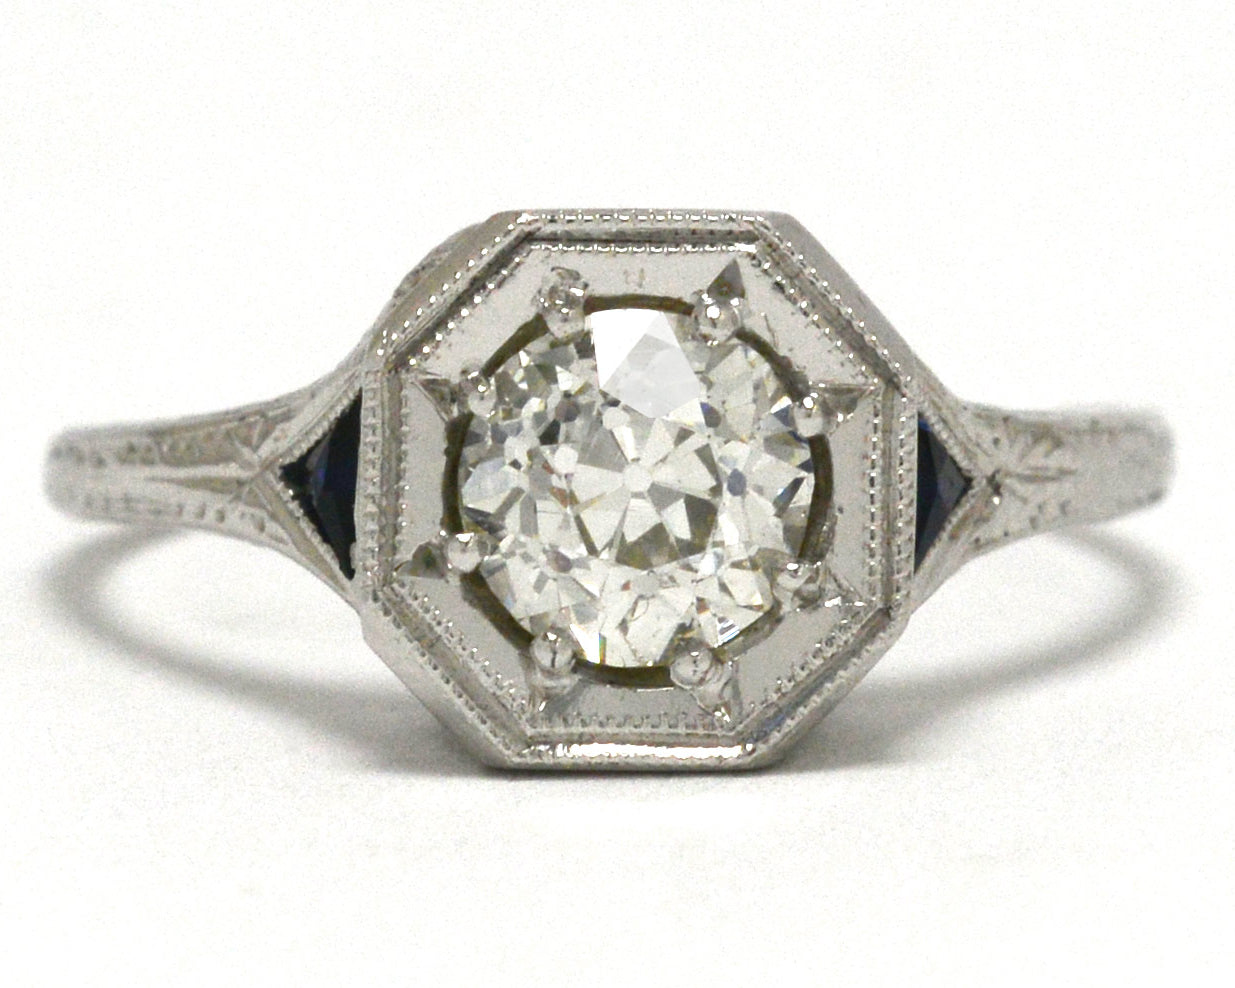 An antique old european diamond three stone engagement ring with sapphires.